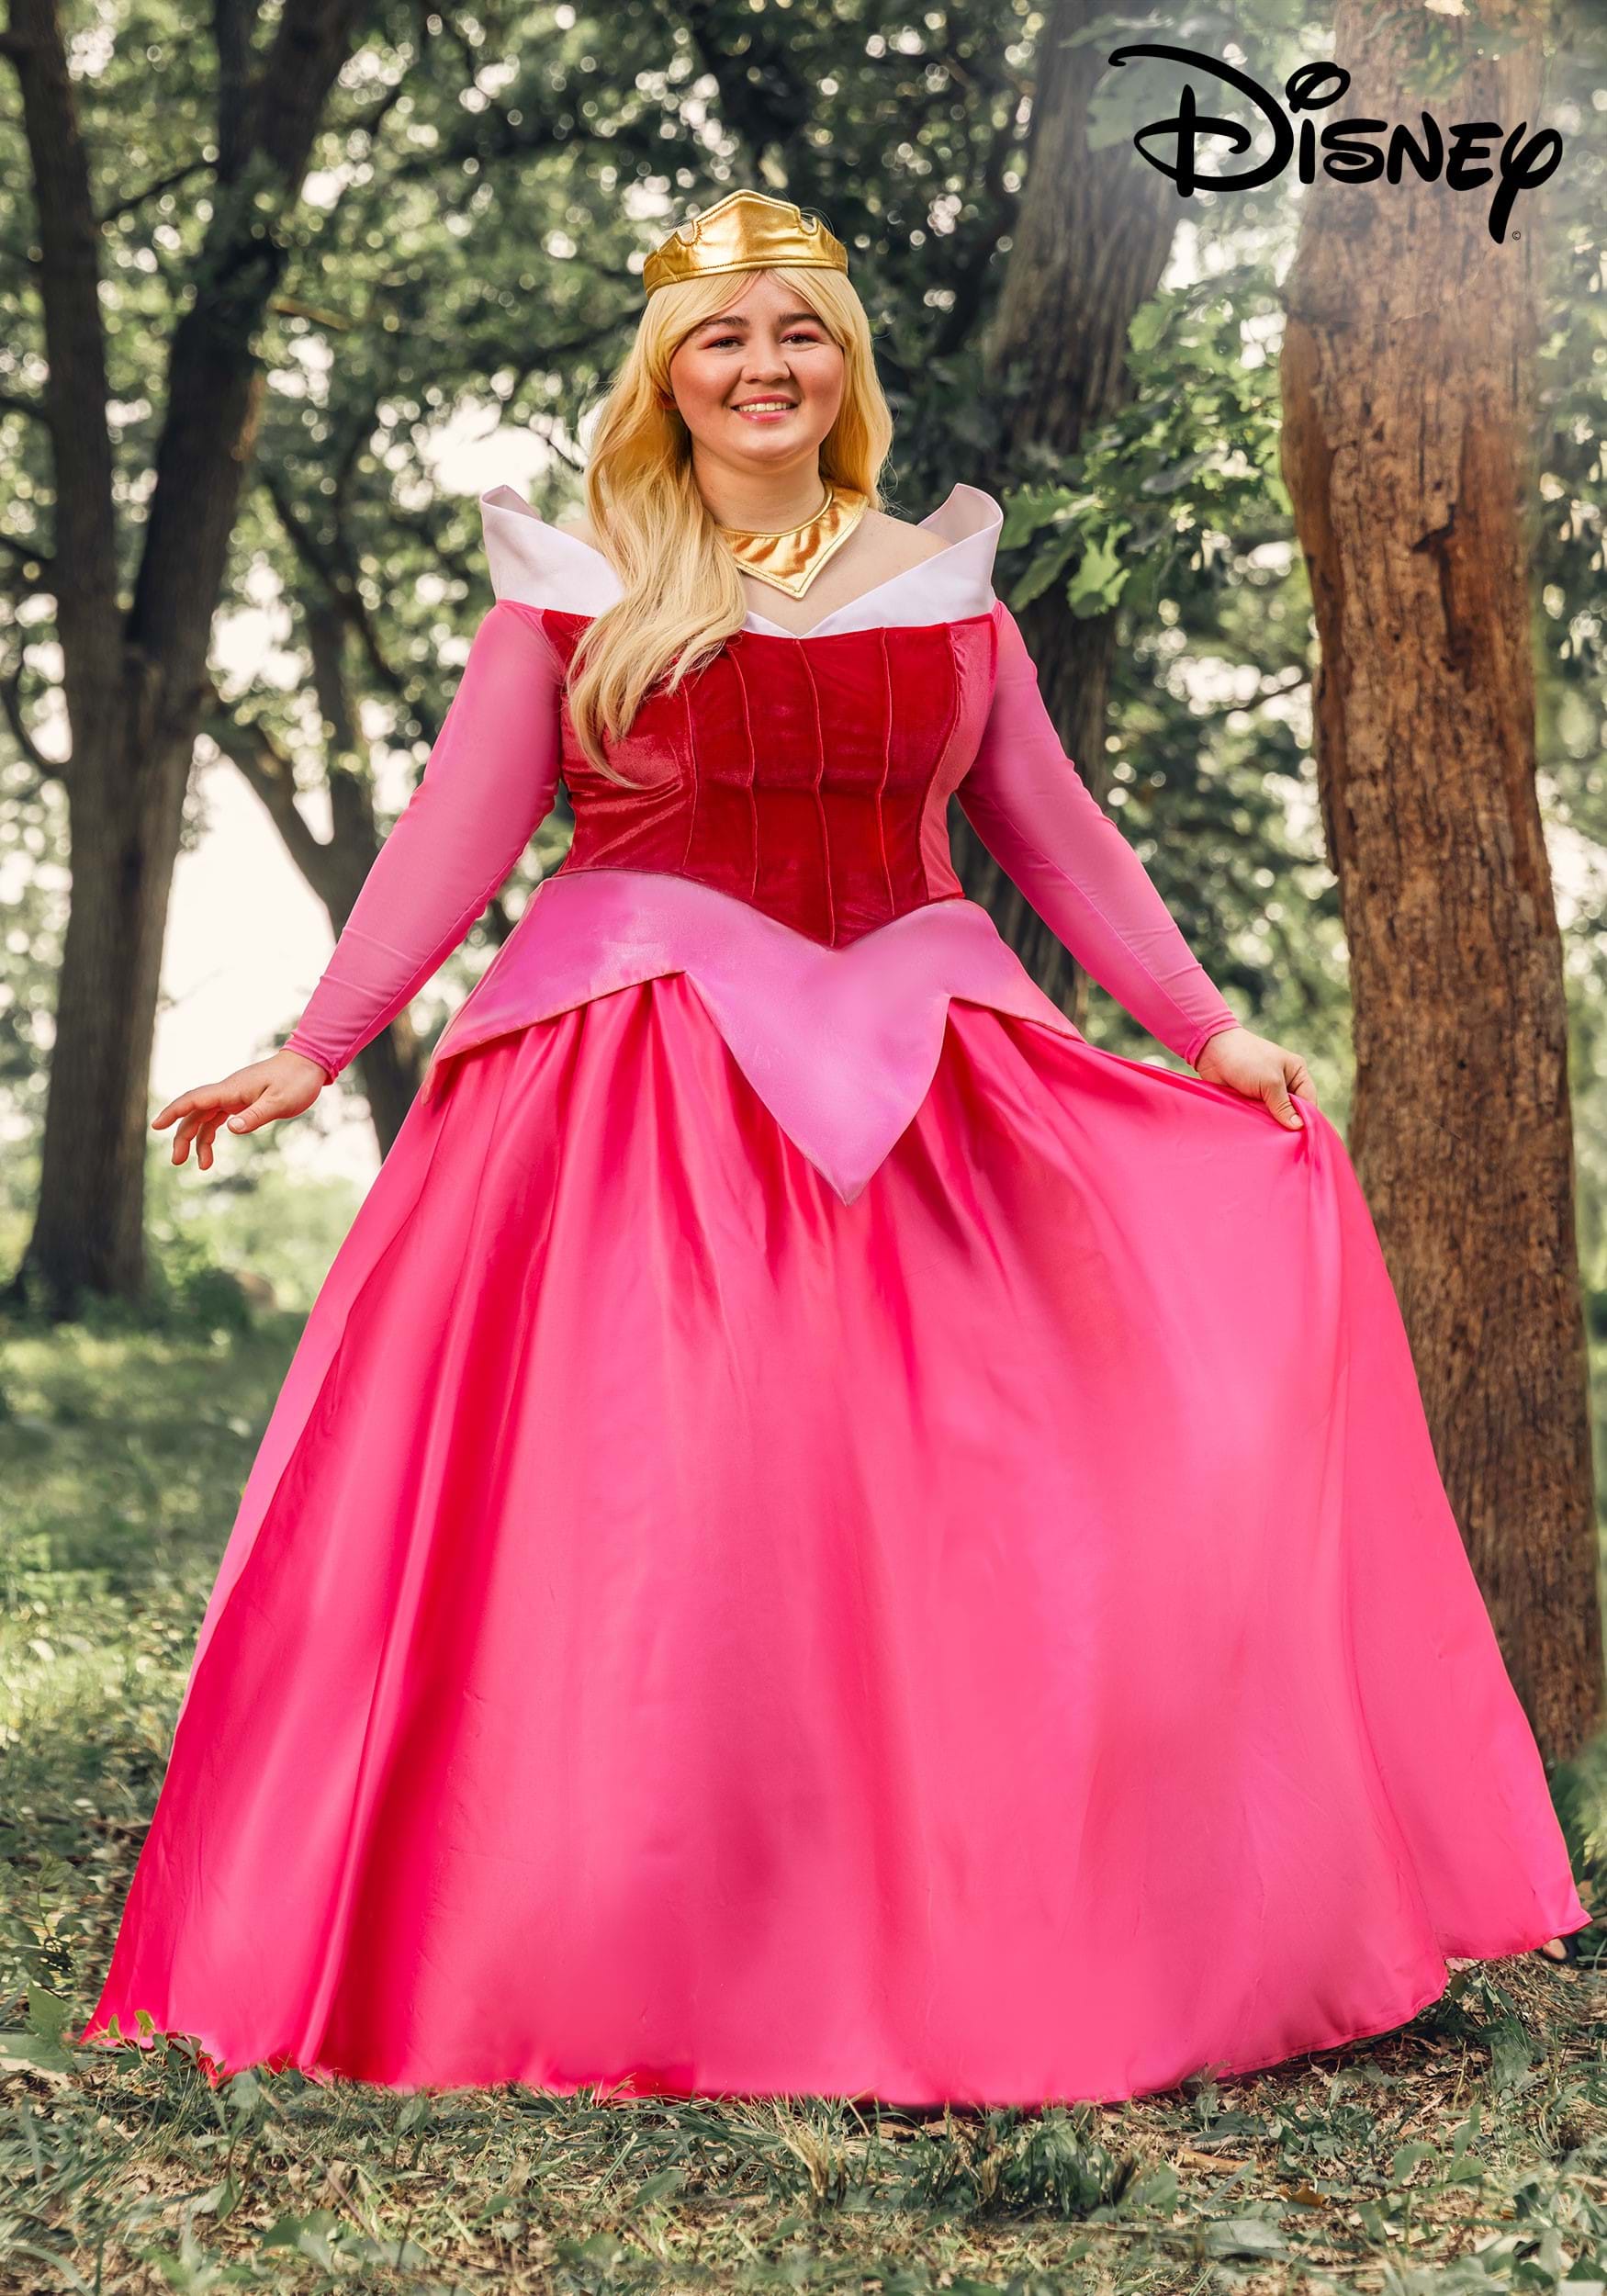 Is Aurora Sleeping Beauty? And Other Disney Princess Questions